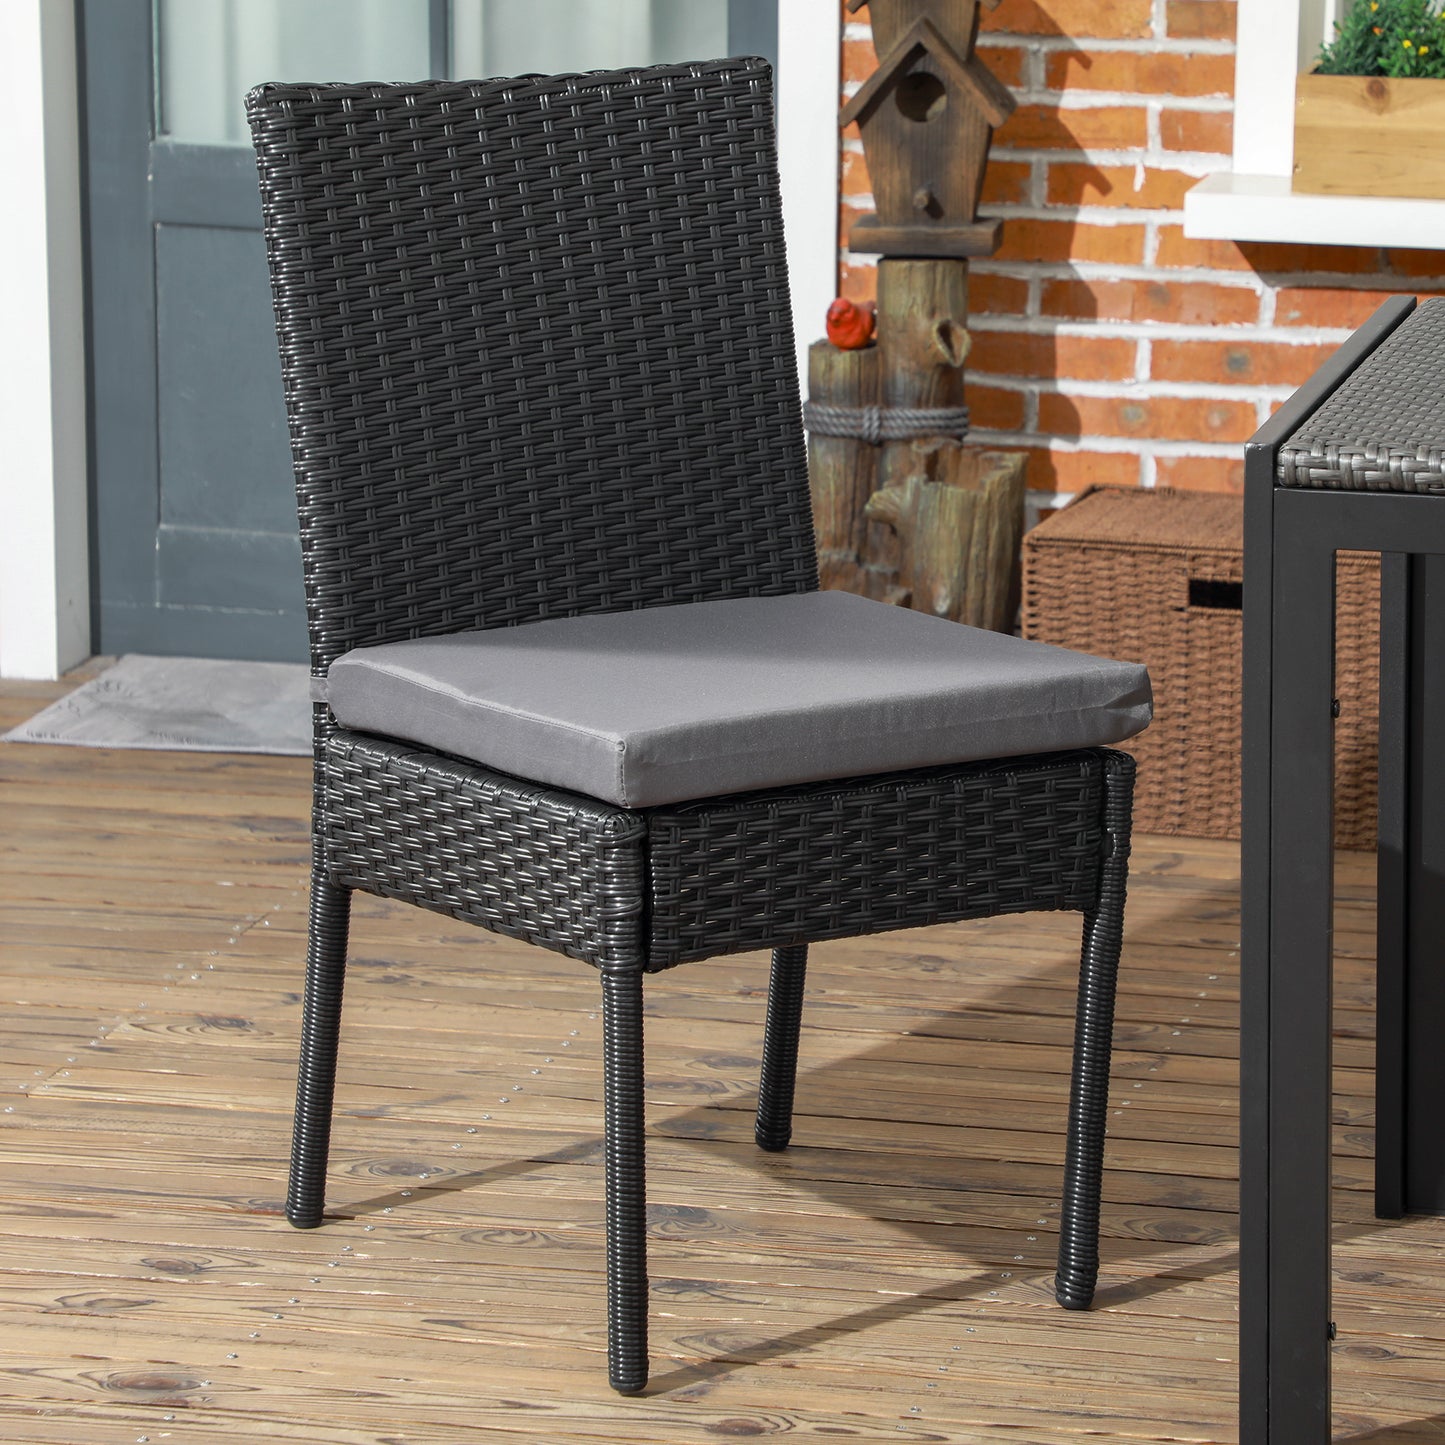 Outsunny Set of Two Armless Rattan Garden Chairs - Black